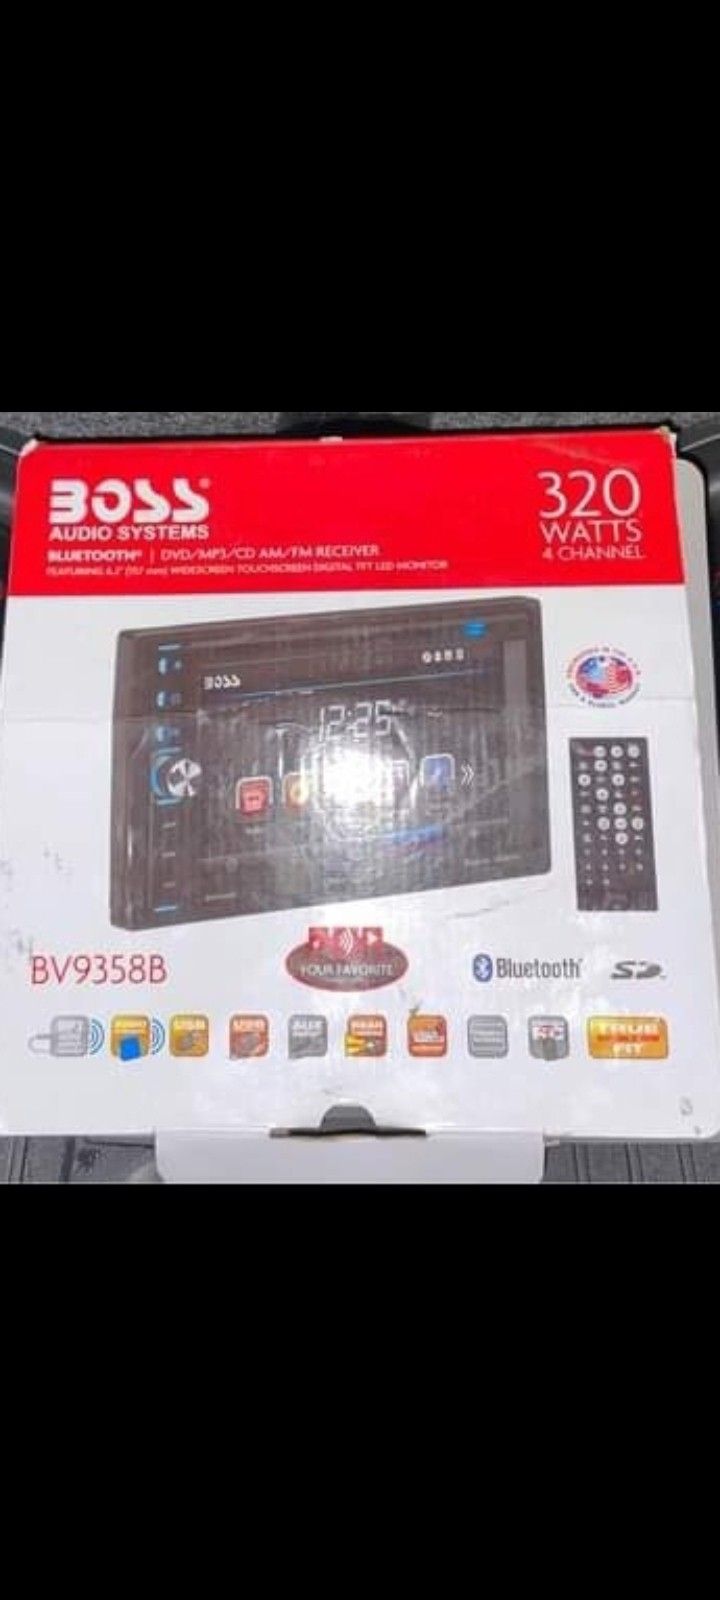 New BOSS DOUBLE DIN TOUCHSCREEN BLUETOOTH CD DVD AUXILIARY USB INPUT 